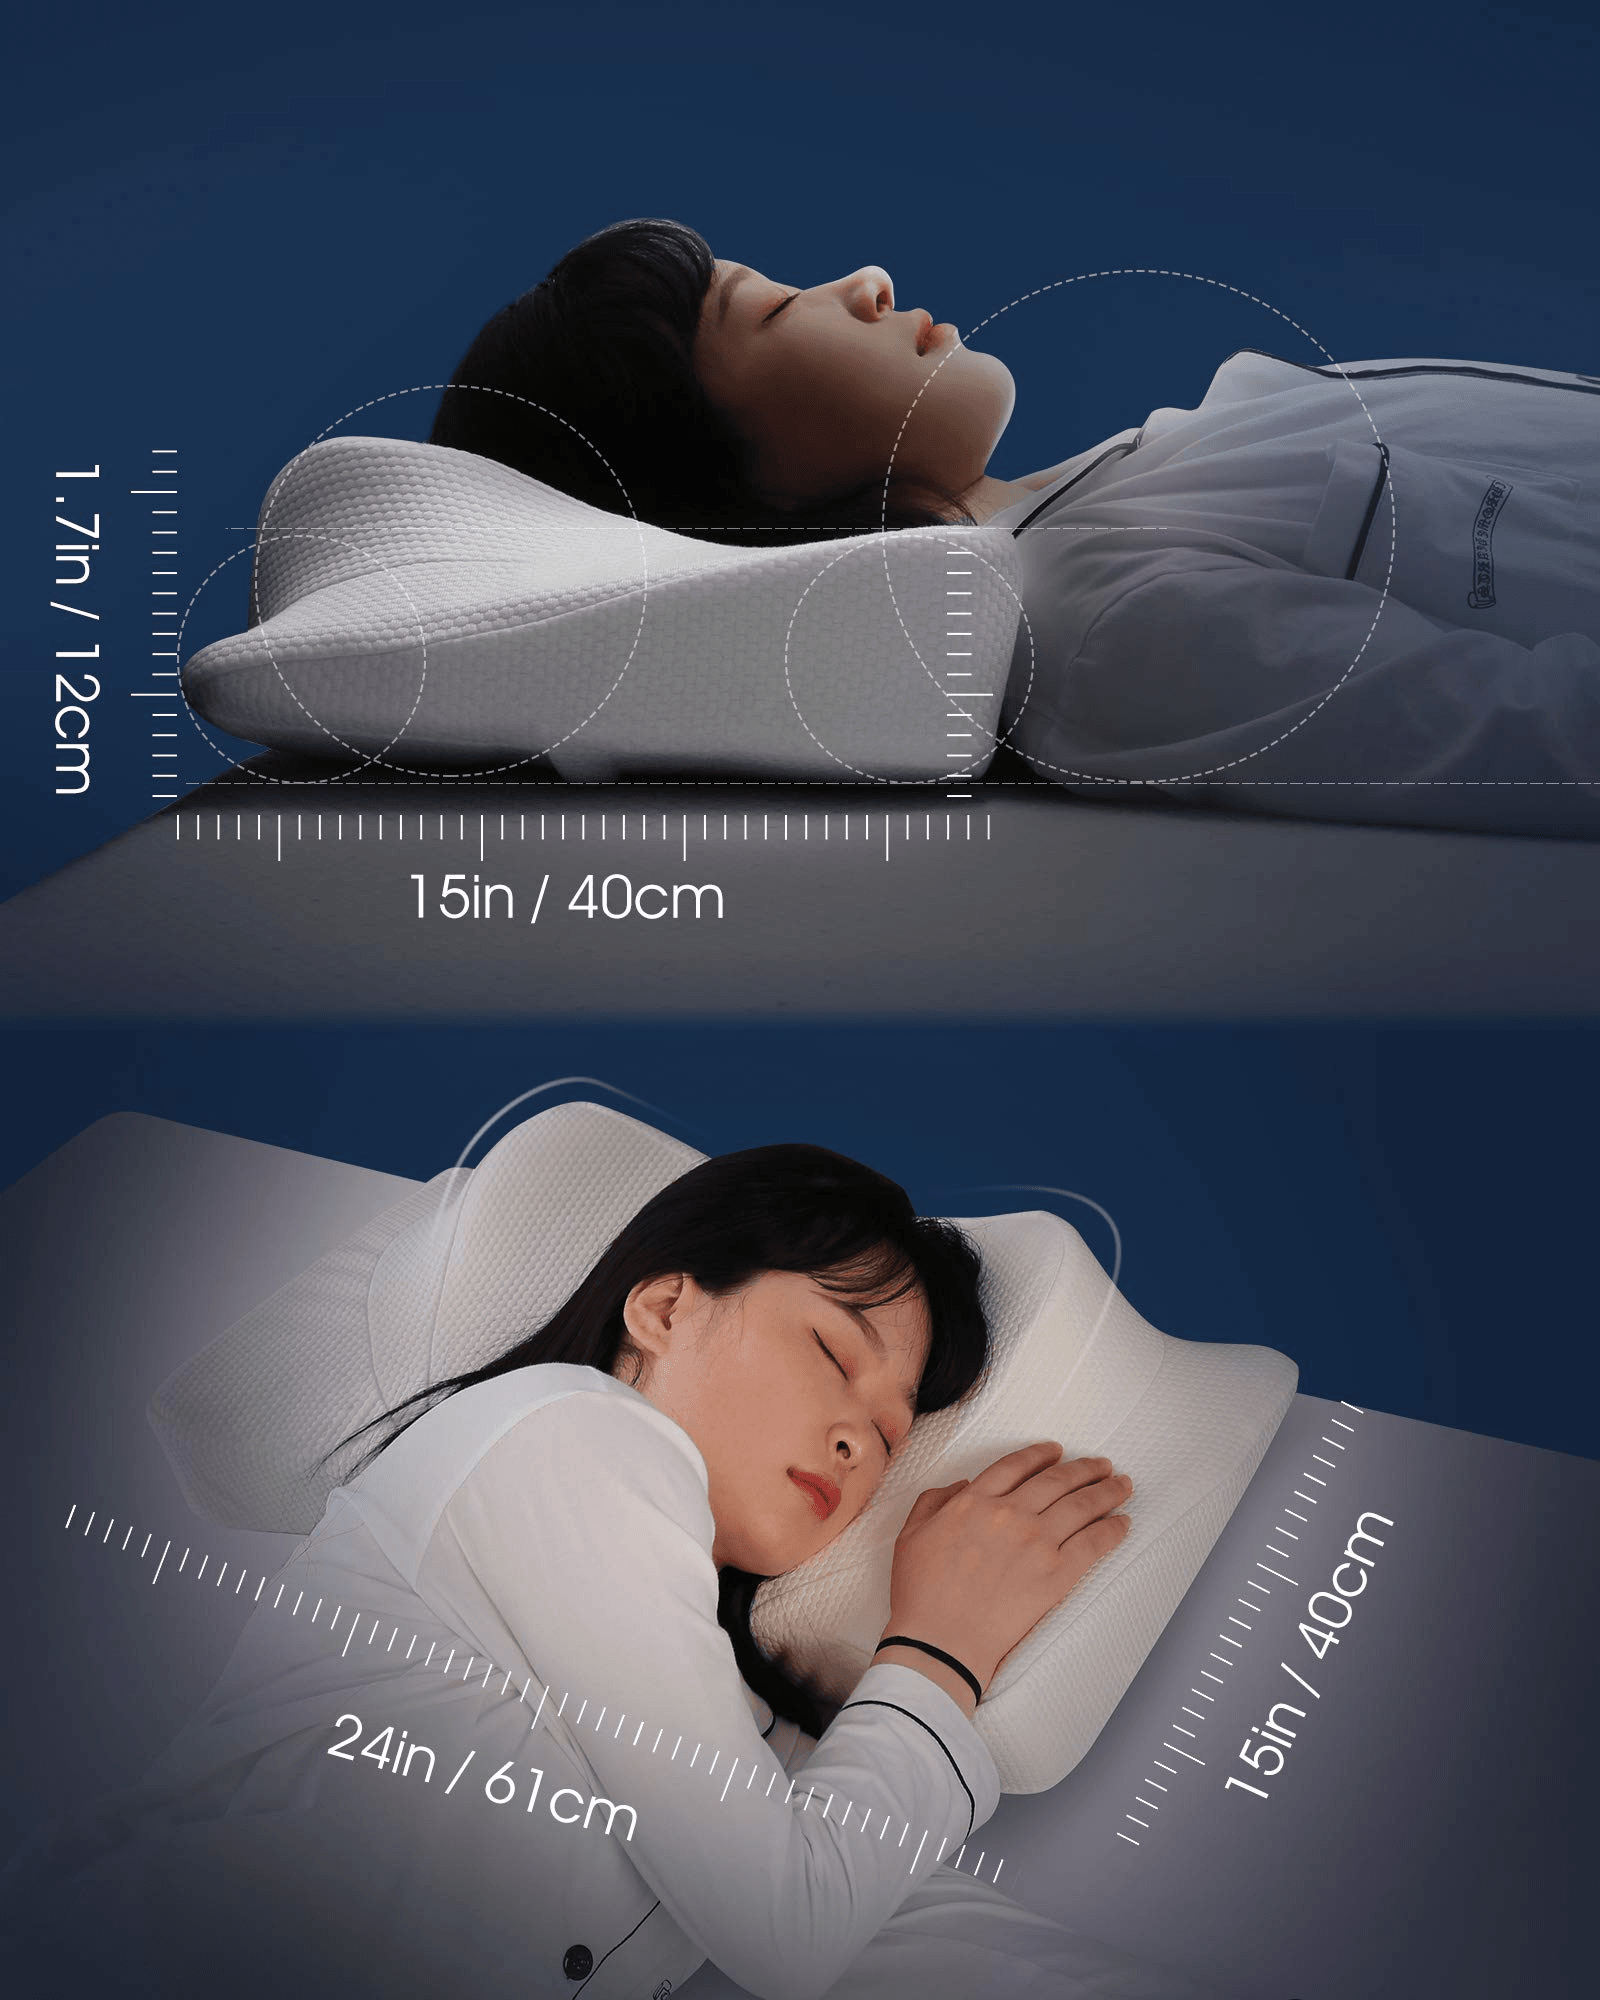 SUTERA - Contour Memory Foam Pillow for Sleeping, Orthopedic Cervical  Support for Neck, Shoulder and Back Pain Relief, Ergonomic Pillow for Side,  Back